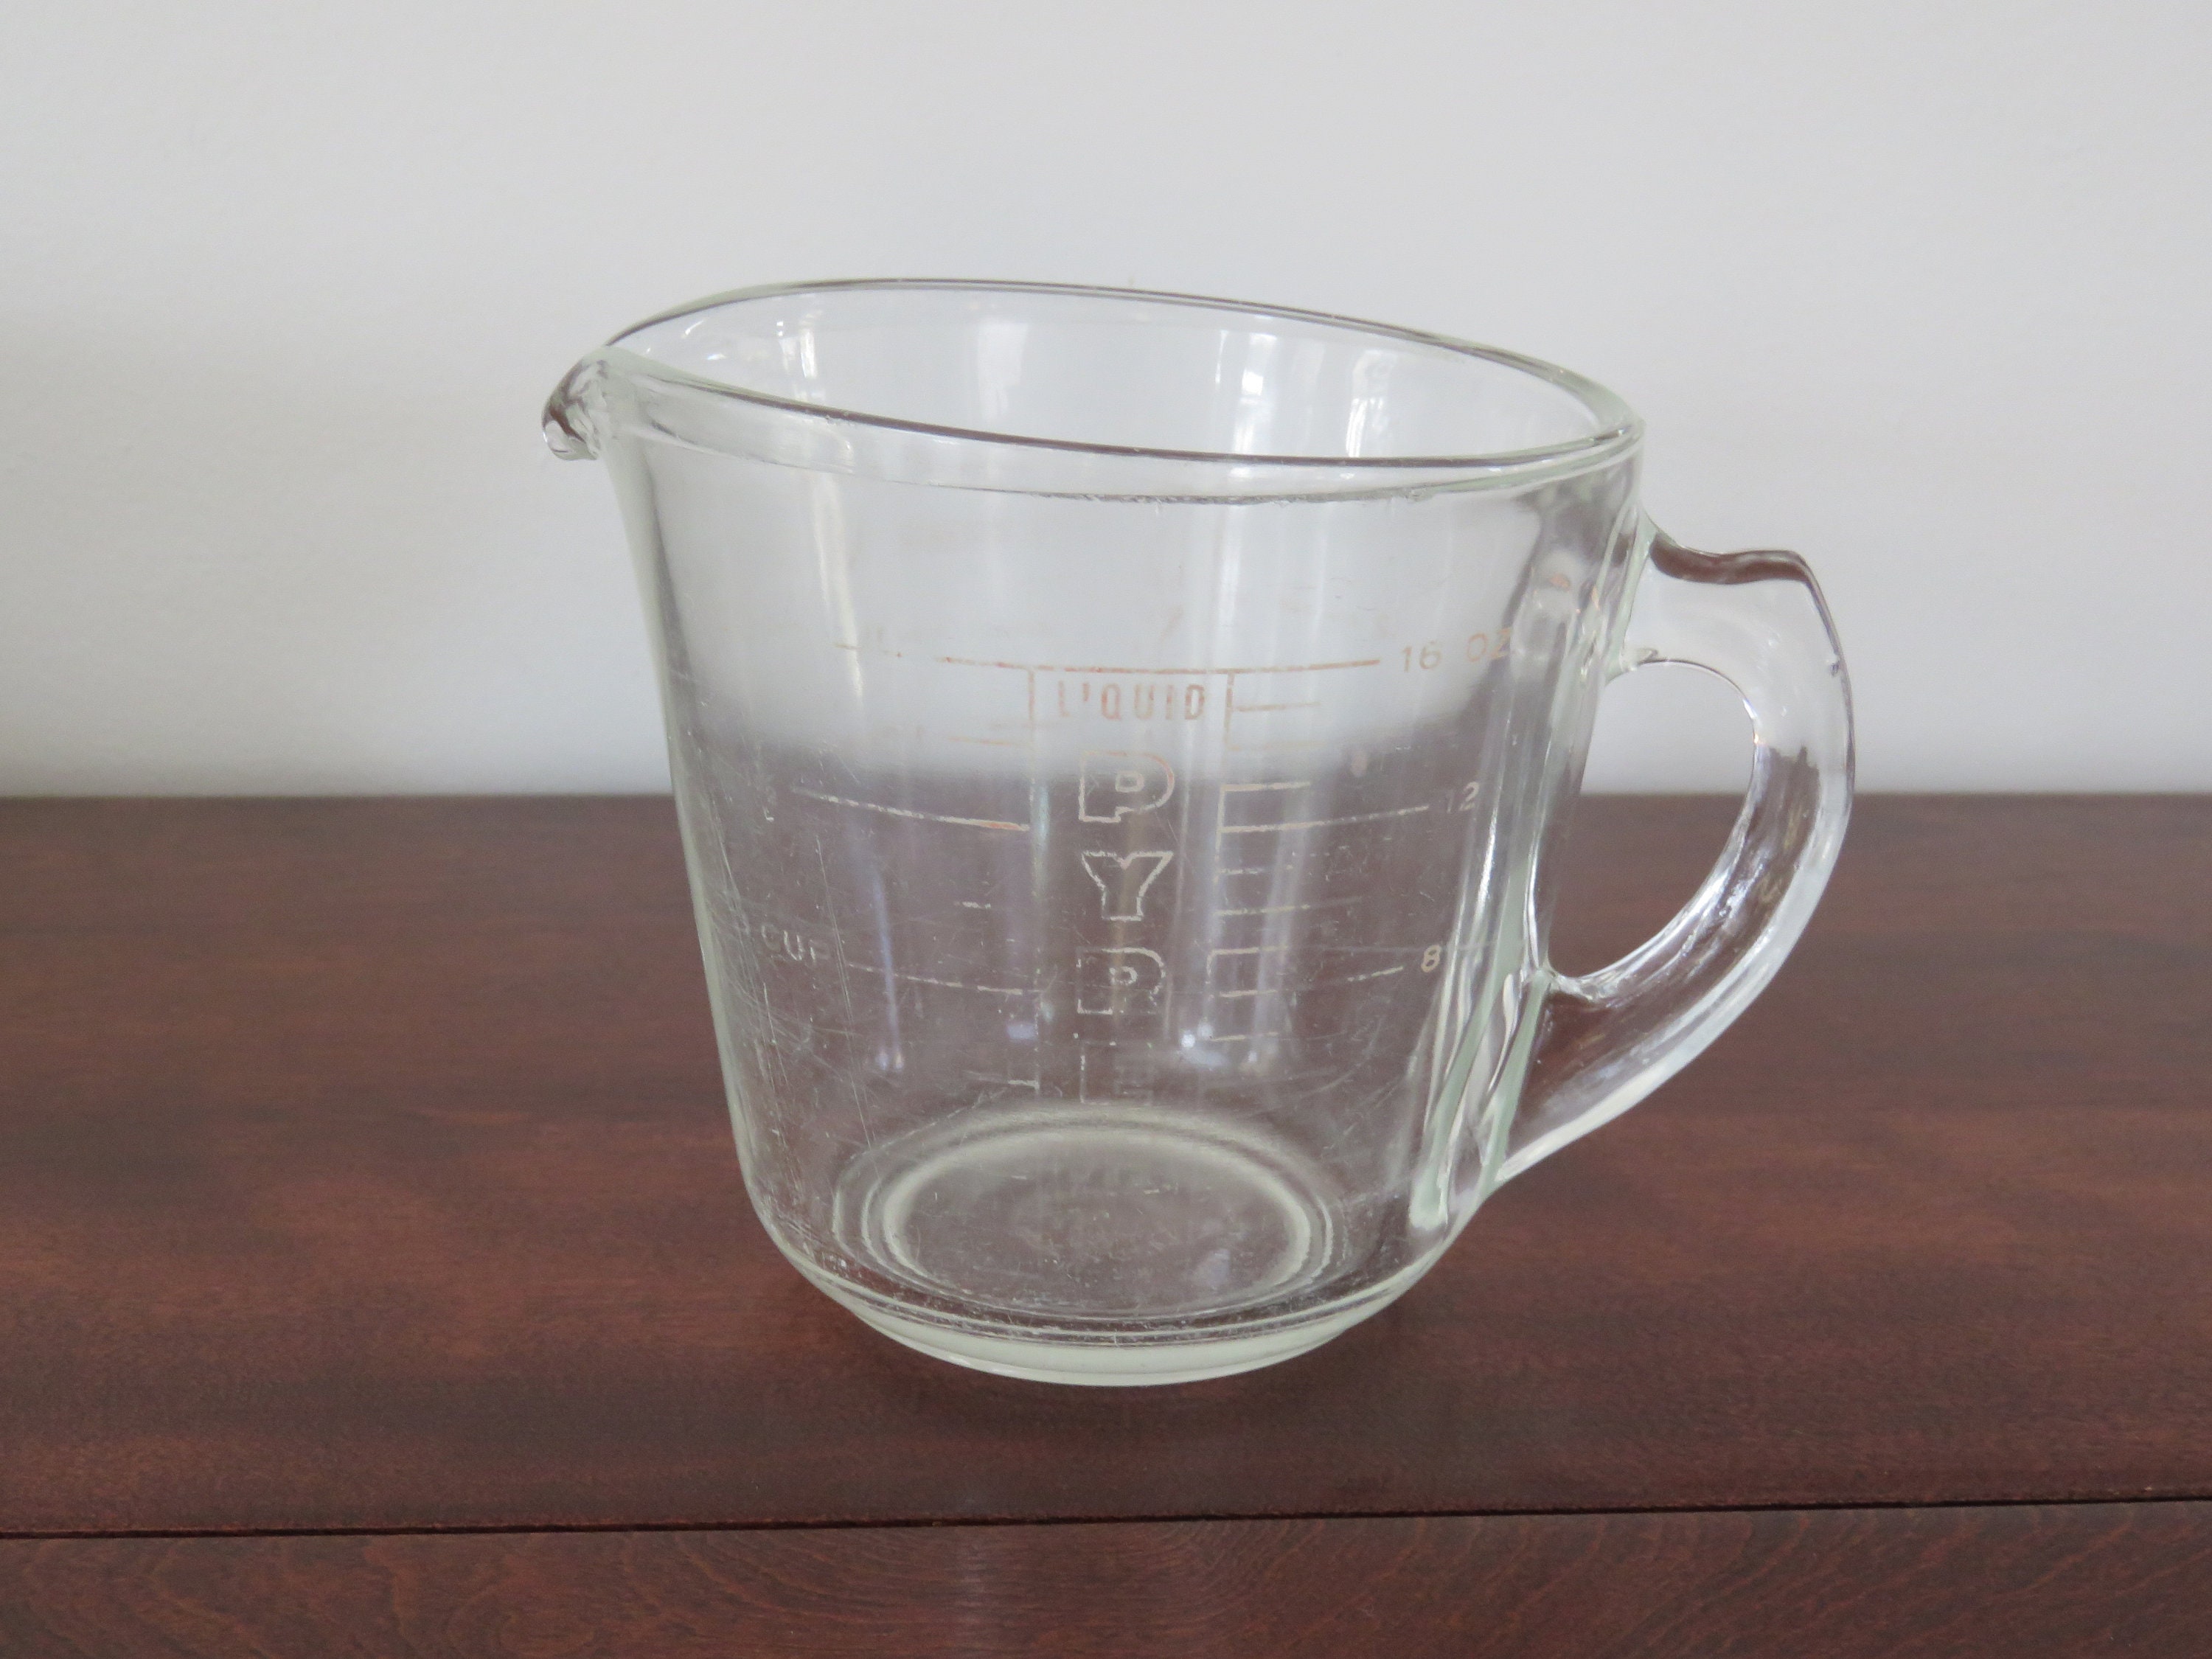 Pyrex 100 2 Cup Anniversary Measuring Cup, Turquoise - Shop Baking